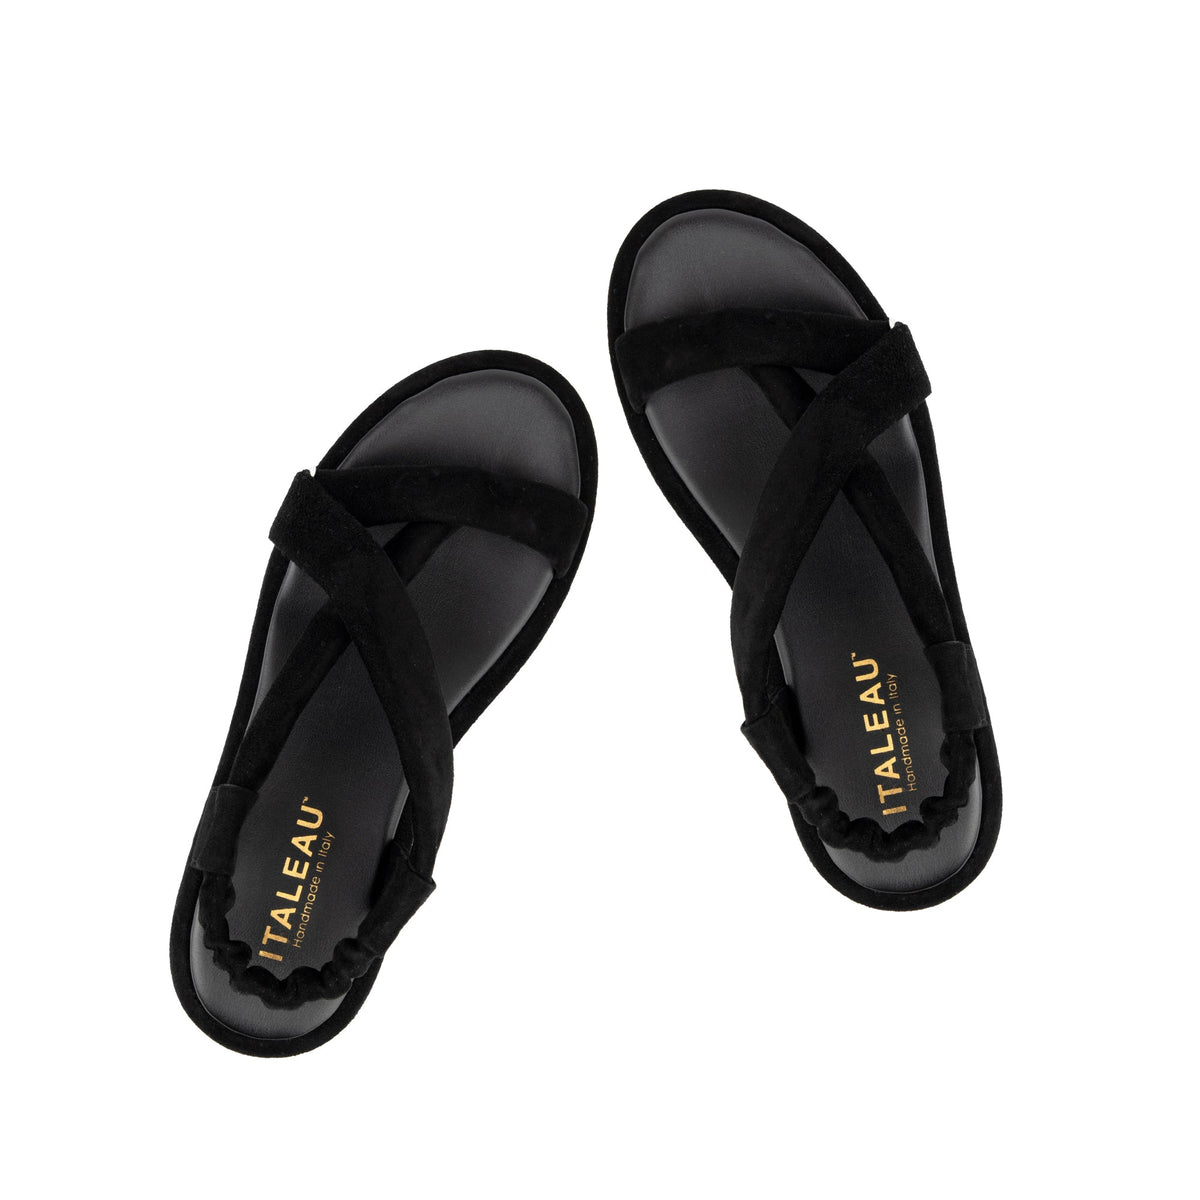 Italeau Zanita sandals are chic and comfortable. Handmade in Italy